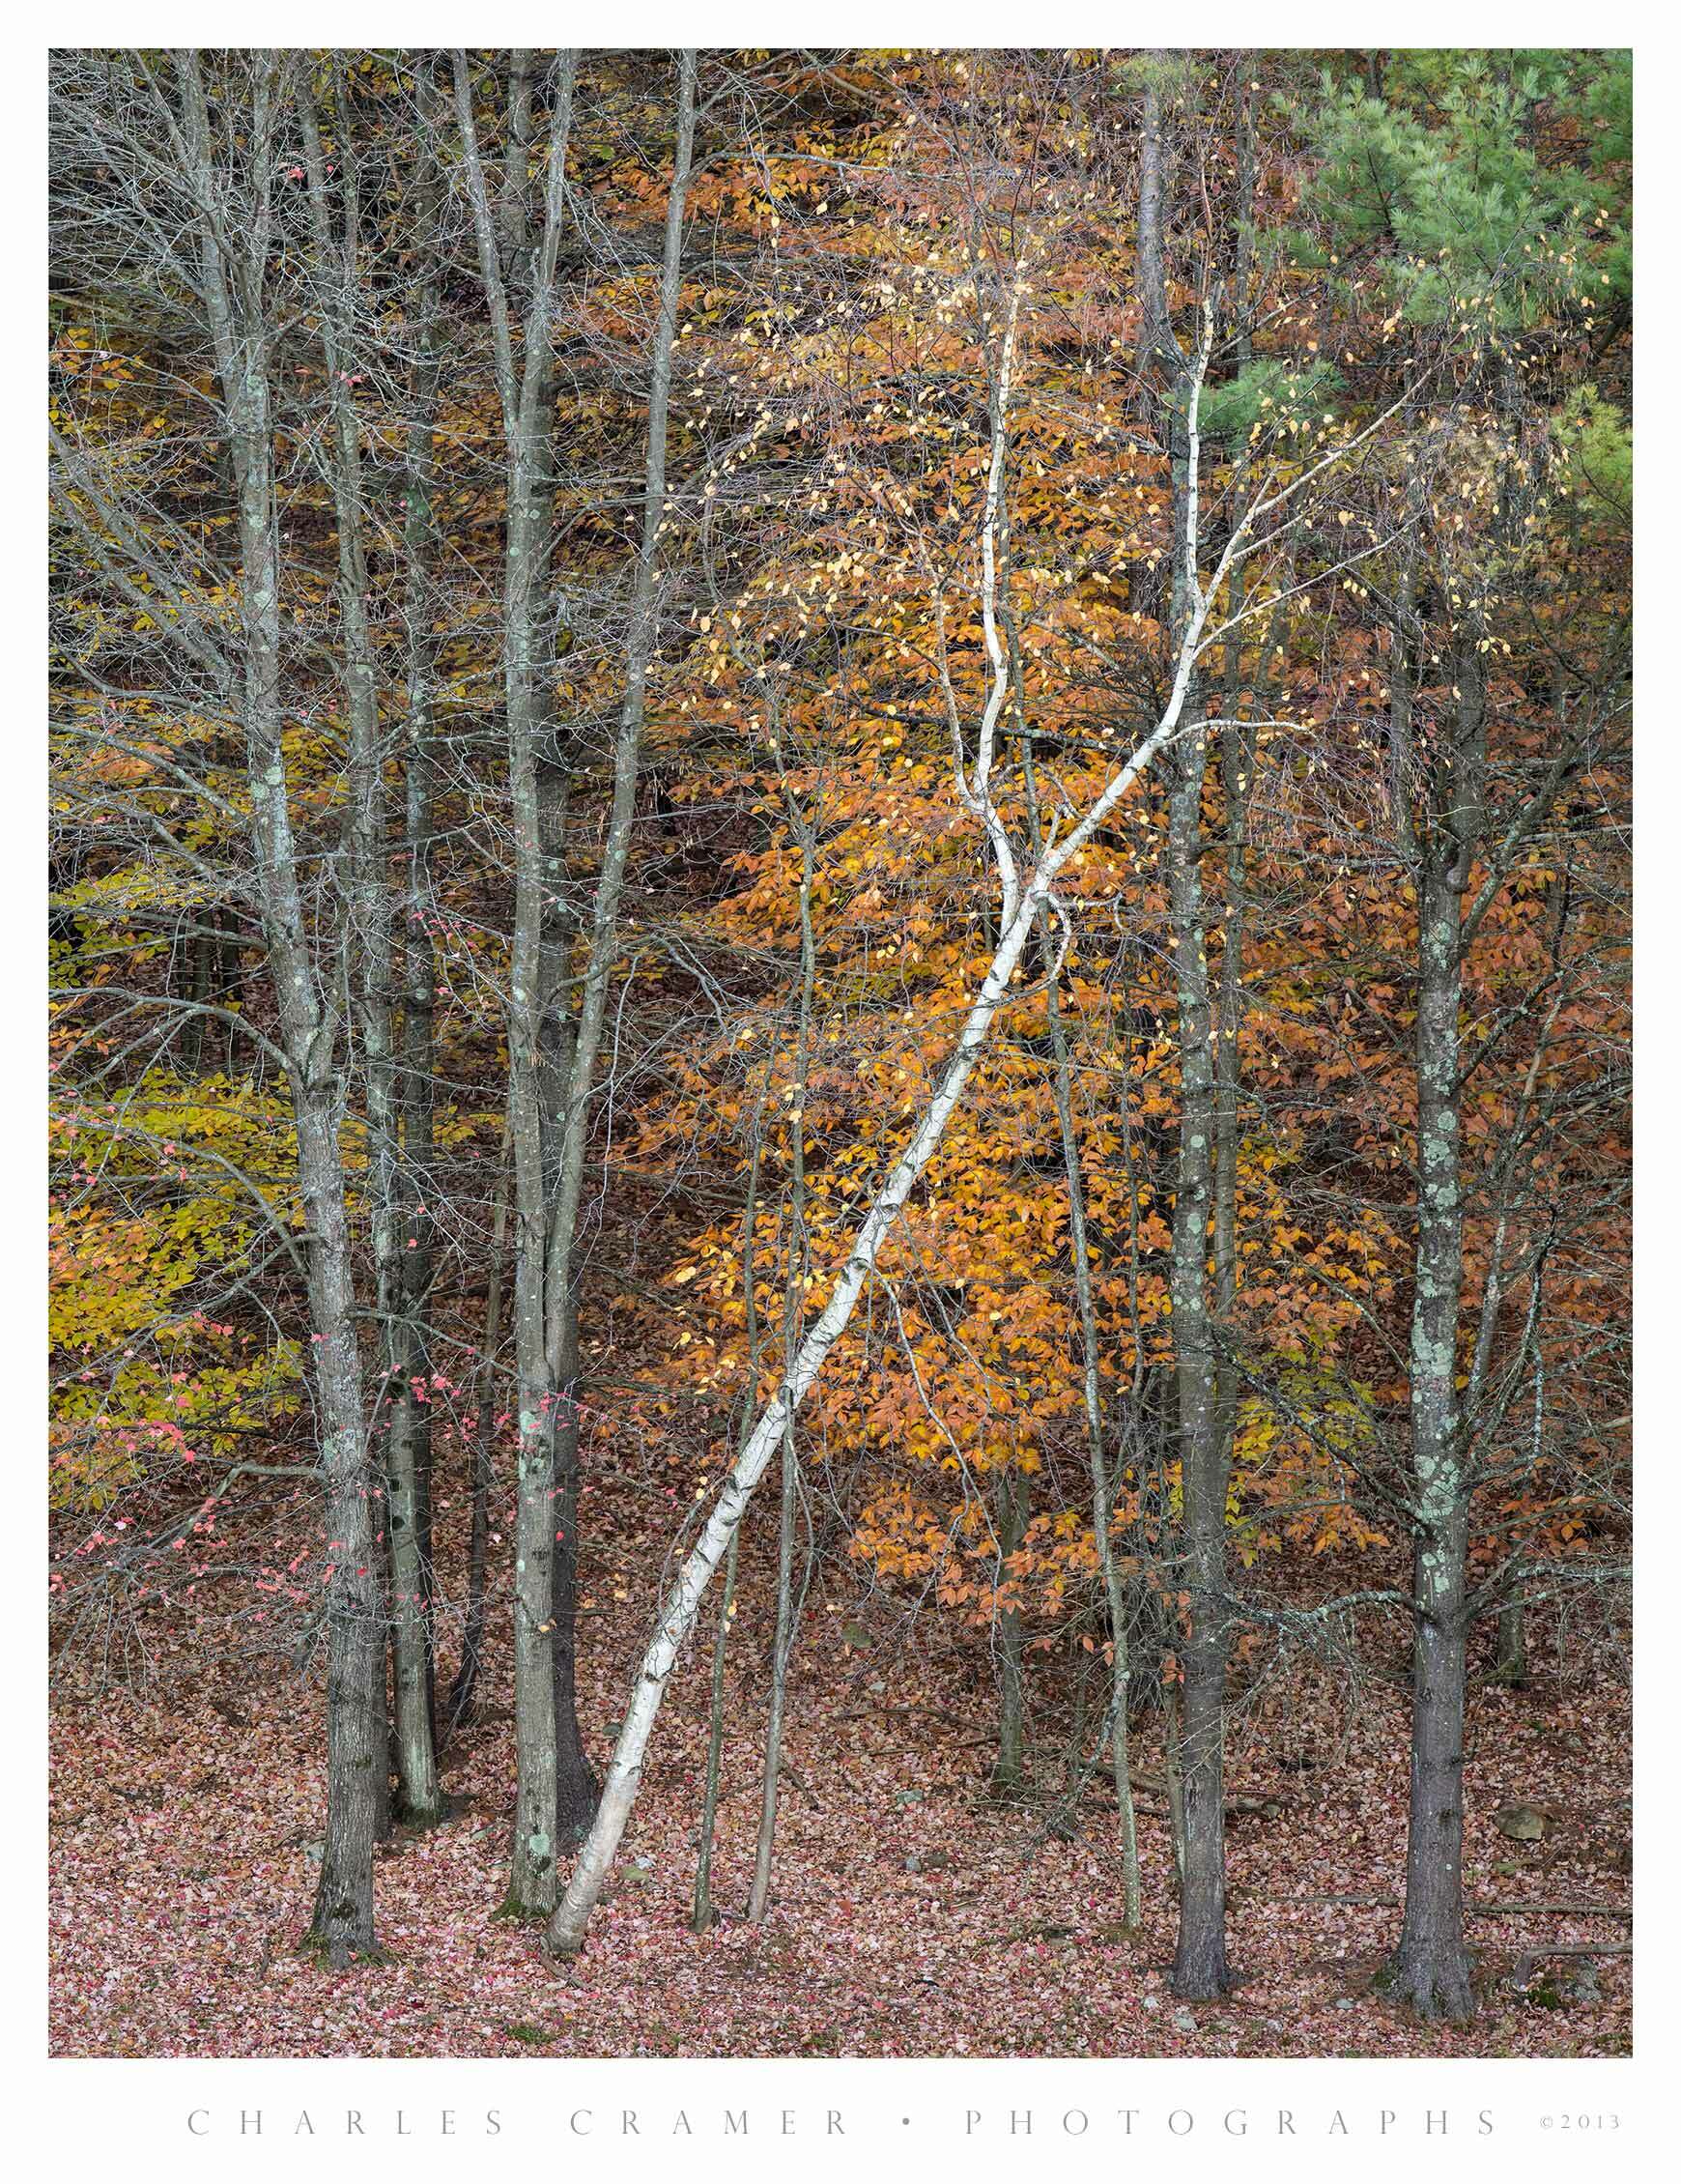 Leaning Birch, Fall, Acadia National Park